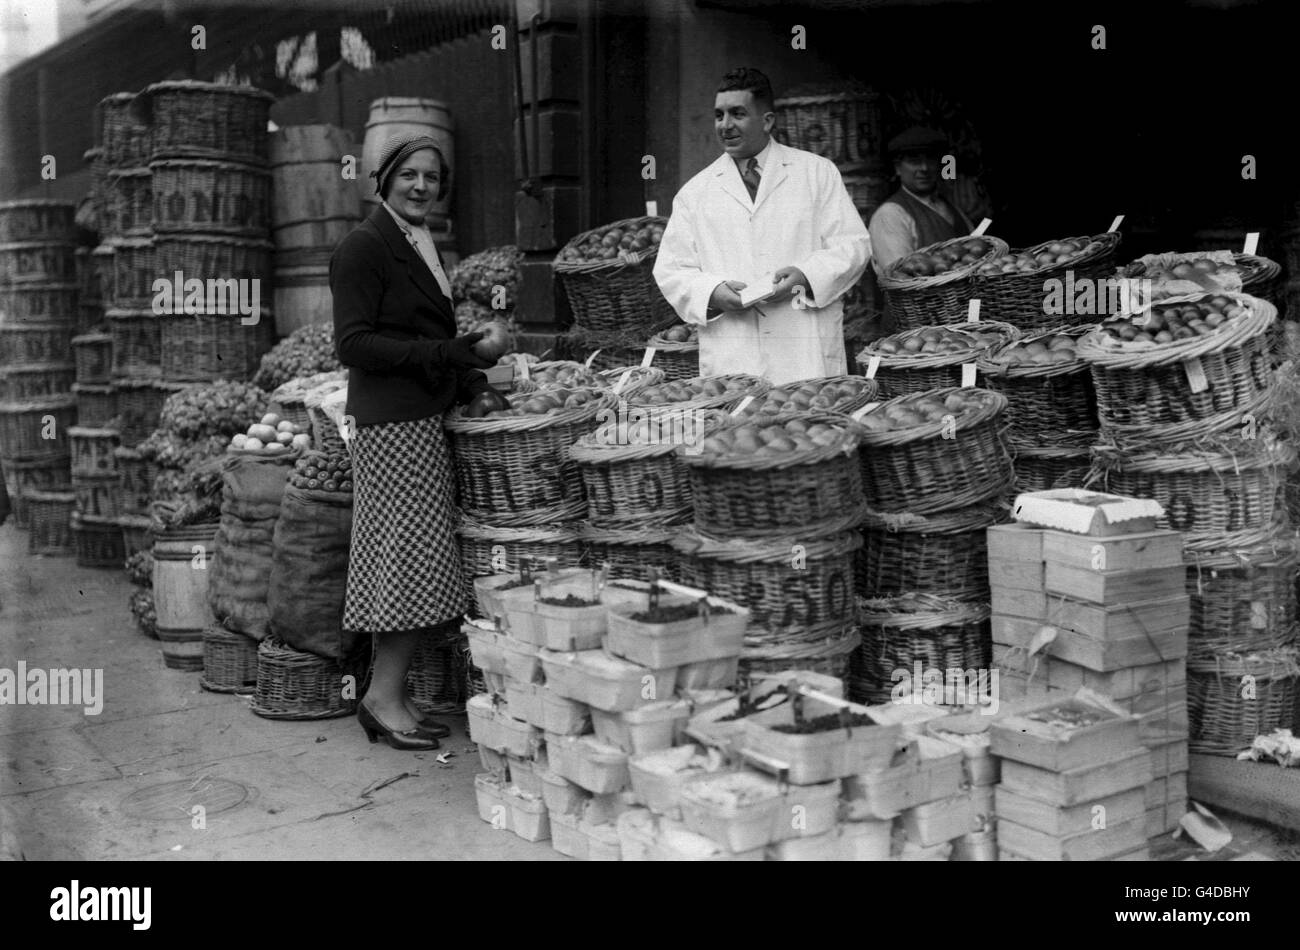 PA NEWS PHOTO 6/10/32 MISS BETTY NUTHALL MAKING PURCHASES IN LONDON'S COVENT GARDEN MARKET Stock Photo